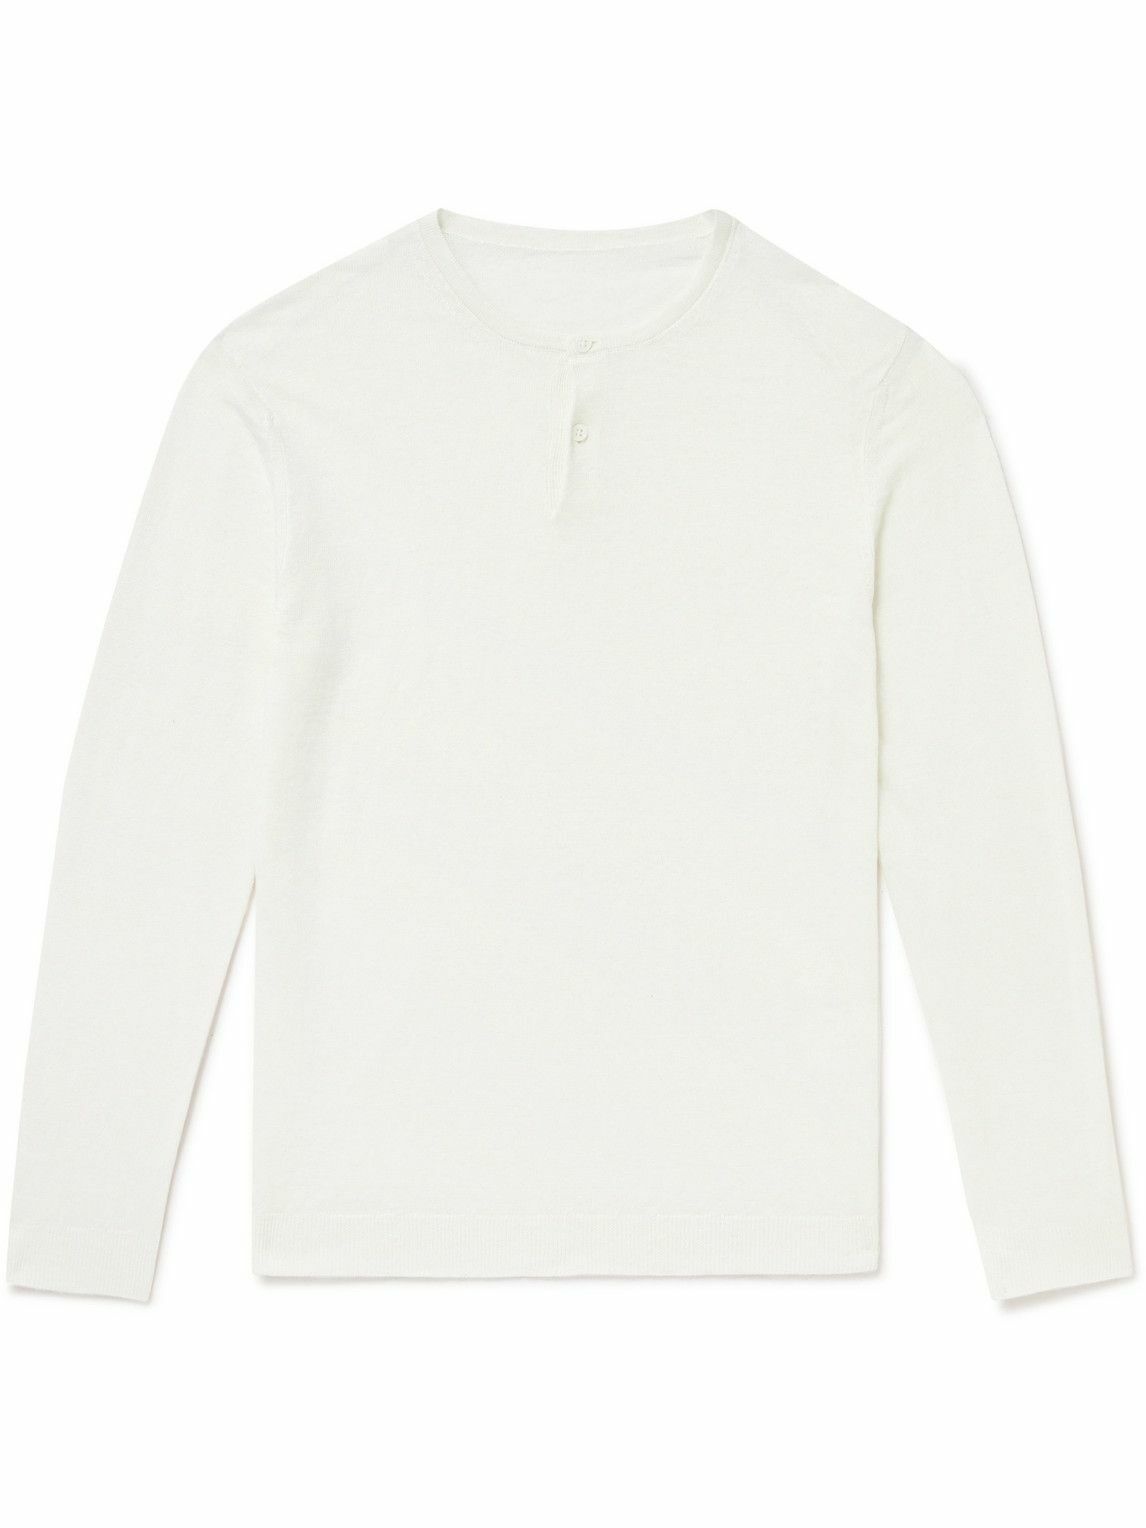 Anderson & Sheppard - Linen Henley T-Shirt - White Anderson & Sheppard